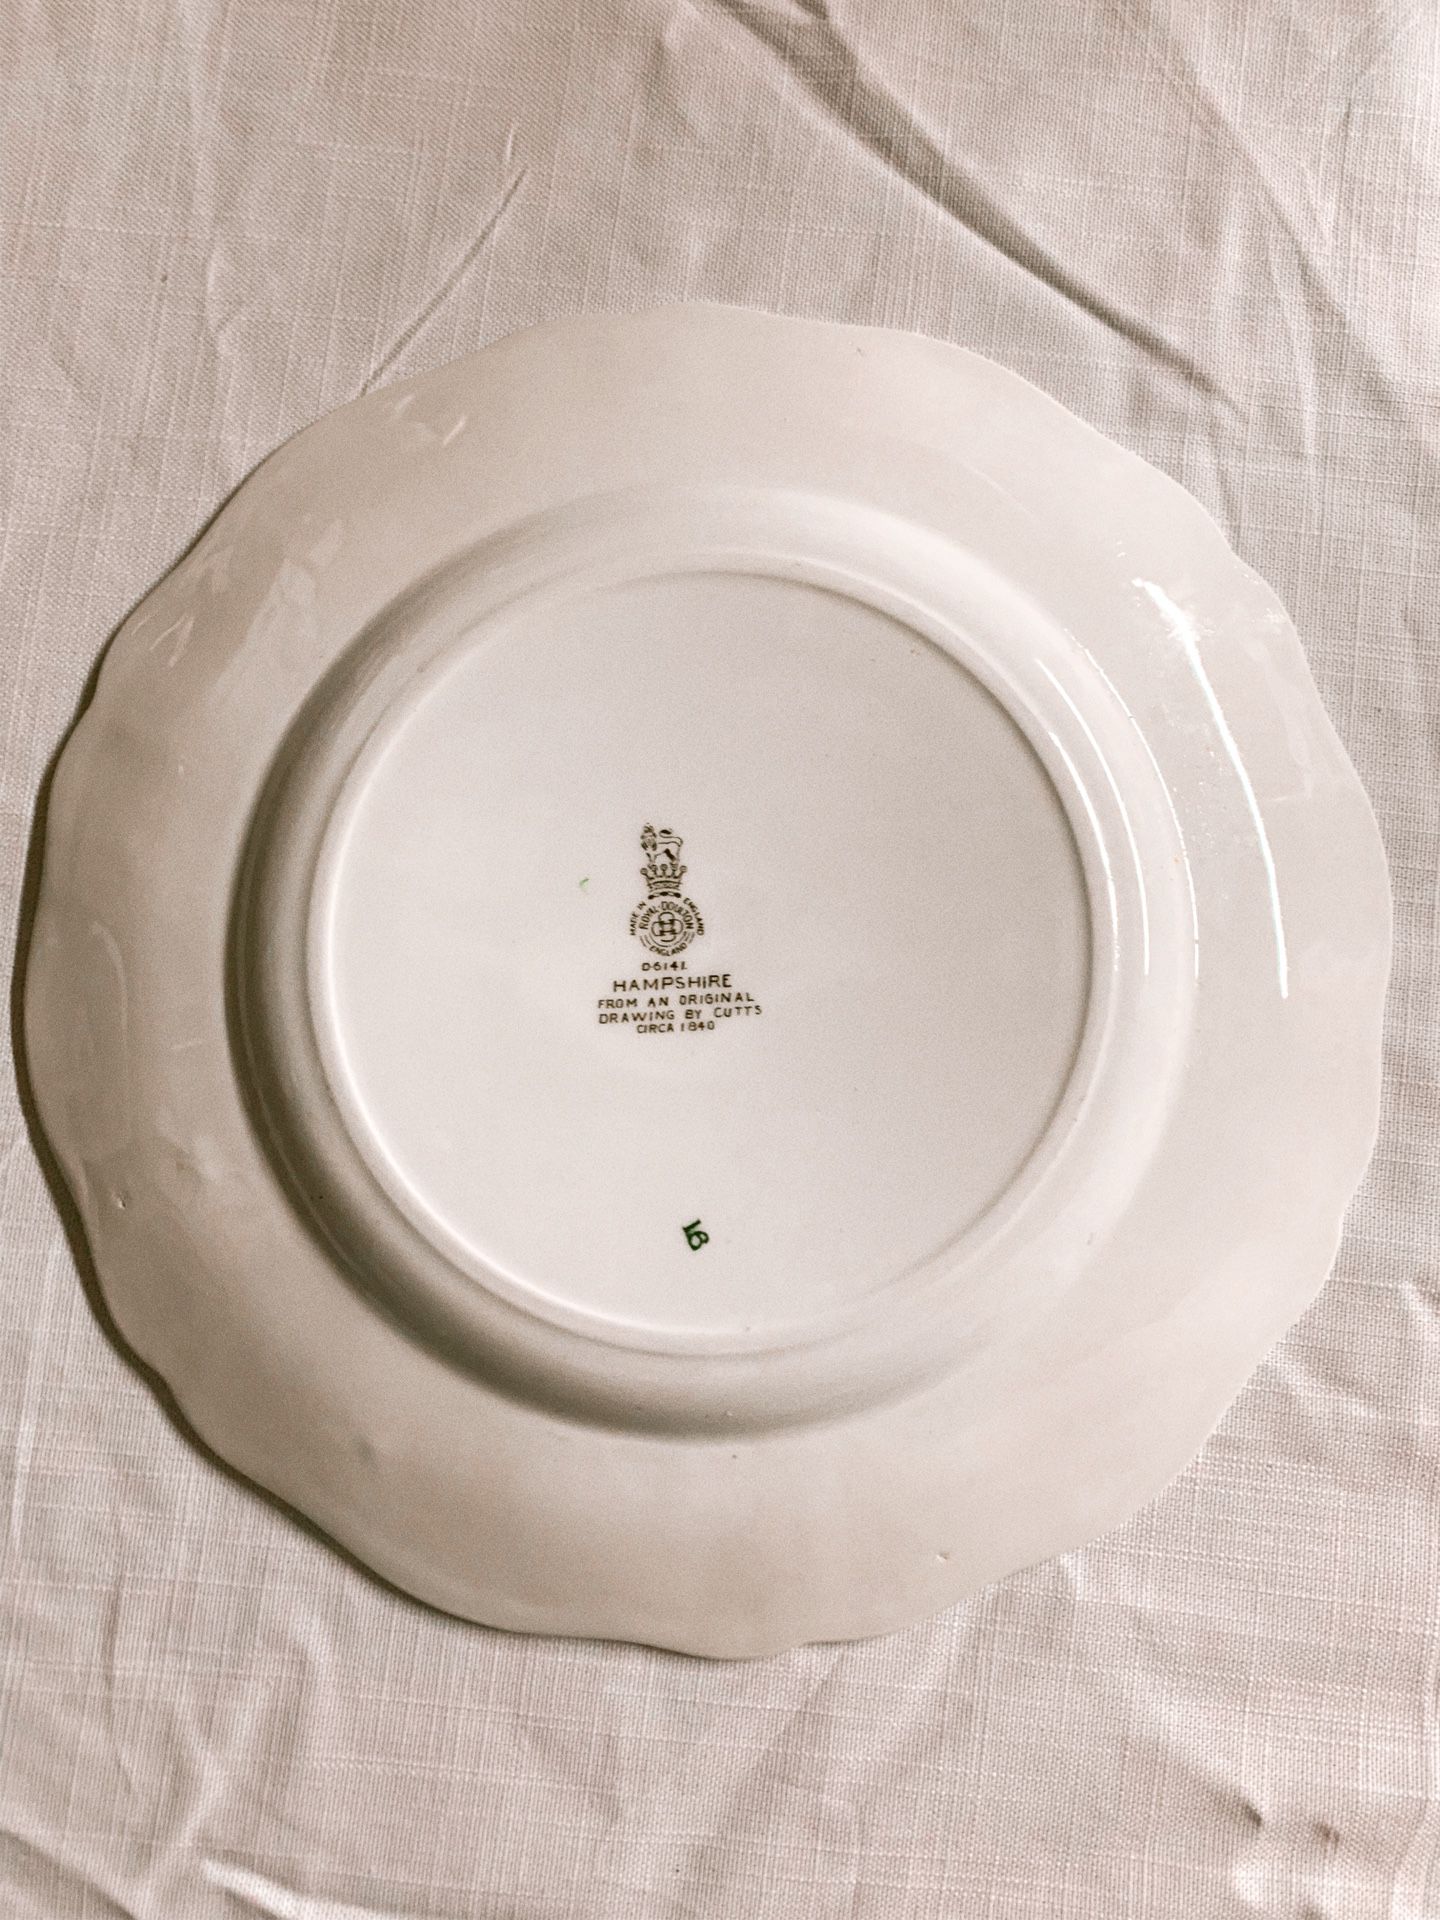 Hampshire Plate by Royal Doulton